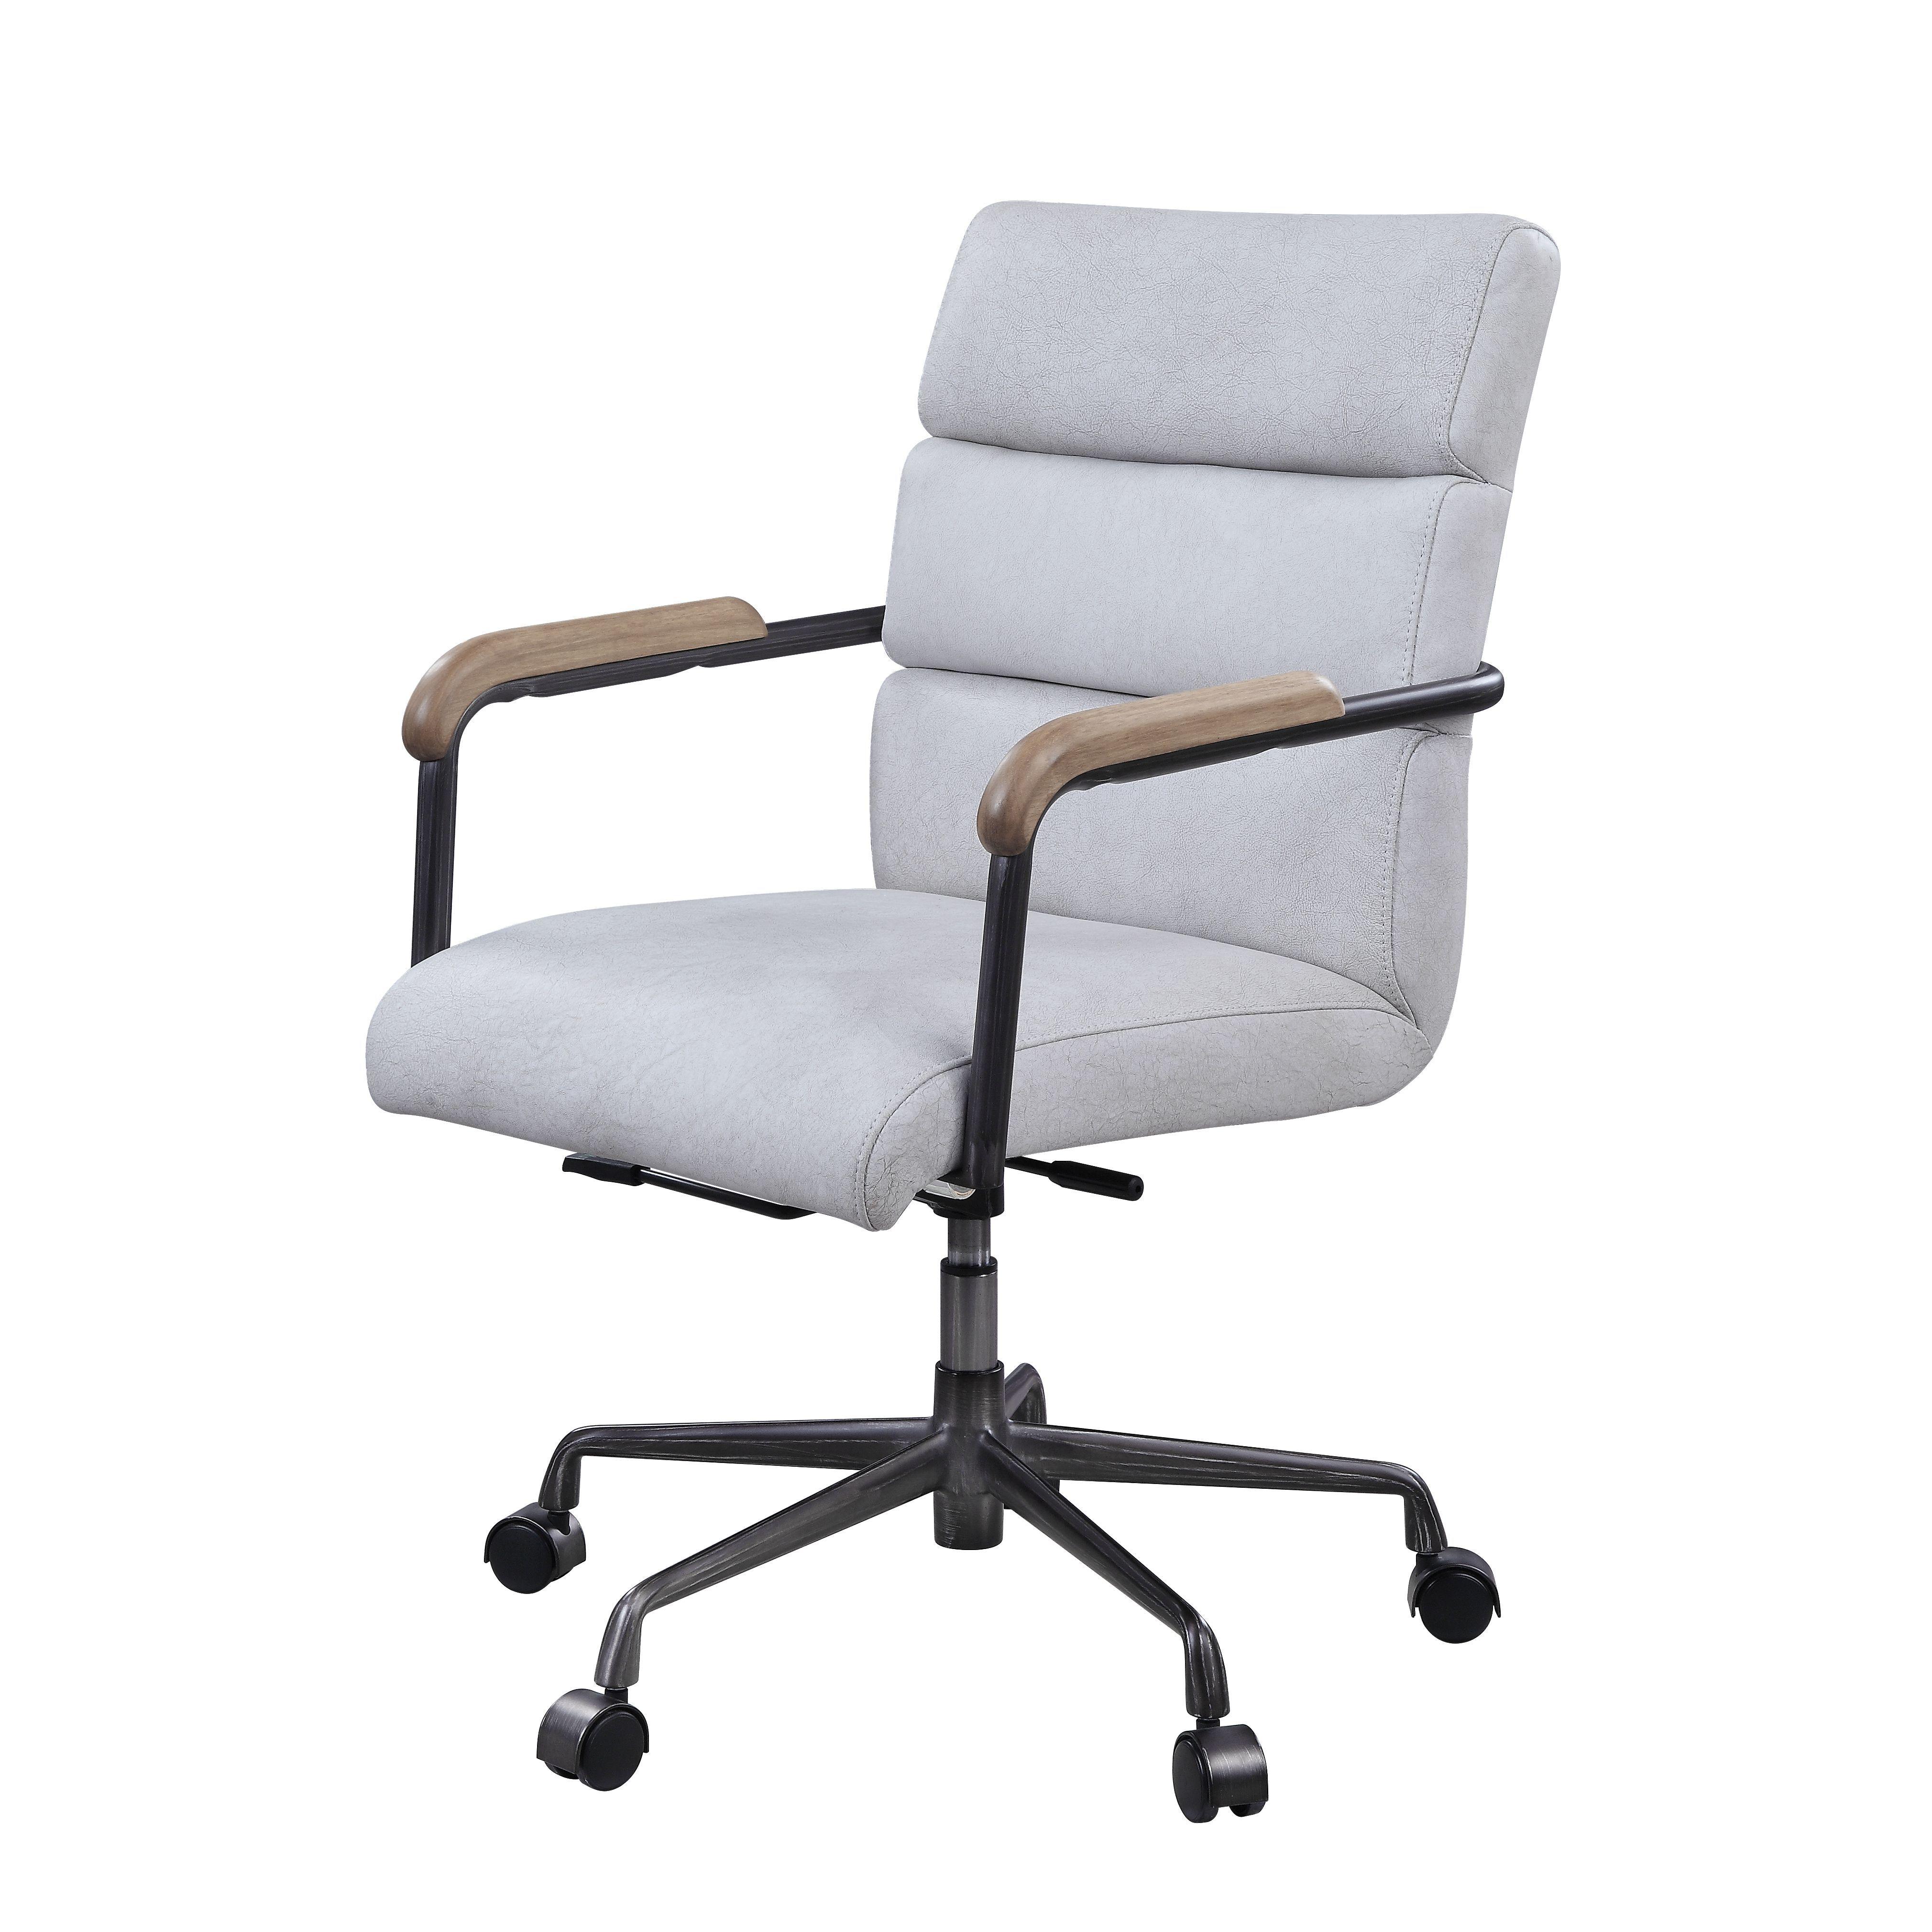 Modern Office Chair Halcyon 93243 in Vintage White Top grain leather